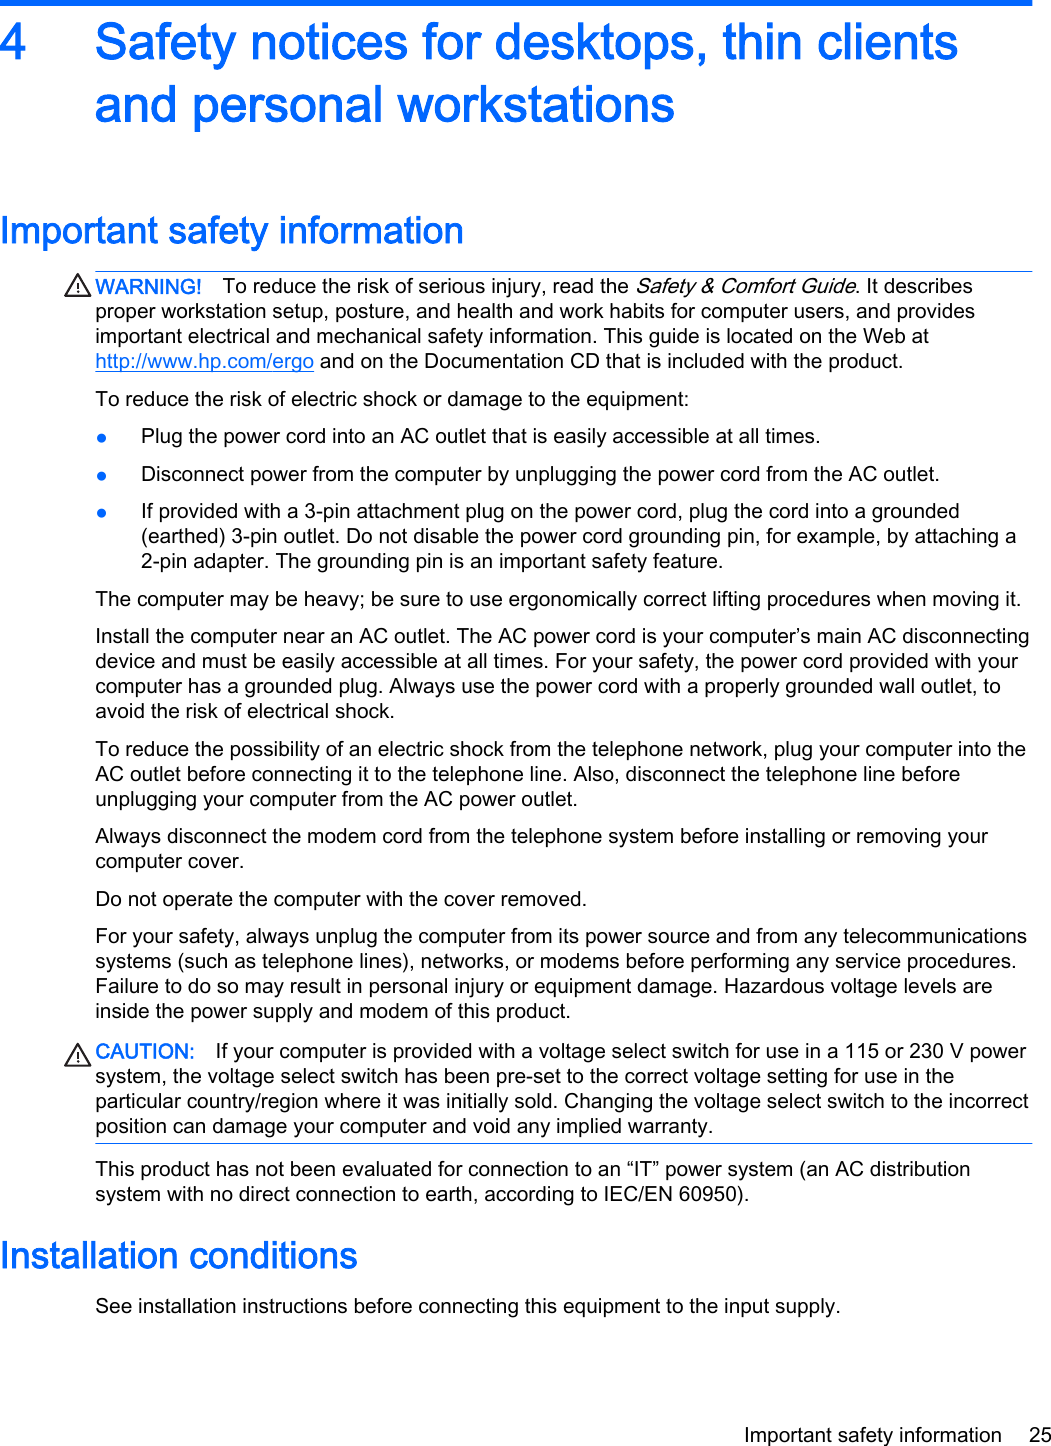 4 Safety notices for desktops, thin clients and personal workstationsImportant safety informationWARNING! To reduce the risk of serious injury, read the Safety &amp; Comfort Guide. It describes proper workstation setup, posture, and health and work habits for computer users, and provides important electrical and mechanical safety information. This guide is located on the Web at http://www.hp.com/ergo and on the Documentation CD that is included with the product.To reduce the risk of electric shock or damage to the equipment:●Plug the power cord into an AC outlet that is easily accessible at all times.●Disconnect power from the computer by unplugging the power cord from the AC outlet.●If provided with a 3-pin attachment plug on the power cord, plug the cord into a grounded (earthed) 3-pin outlet. Do not disable the power cord grounding pin, for example, by attaching a 2-pin adapter. The grounding pin is an important safety feature.The computer may be heavy; be sure to use ergonomically correct lifting procedures when moving it.Install the computer near an AC outlet. The AC power cord is your computer’s main AC disconnecting device and must be easily accessible at all times. For your safety, the power cord provided with your computer has a grounded plug. Always use the power cord with a properly grounded wall outlet, to avoid the risk of electrical shock.To reduce the possibility of an electric shock from the telephone network, plug your computer into the AC outlet before connecting it to the telephone line. Also, disconnect the telephone line before unplugging your computer from the AC power outlet.Always disconnect the modem cord from the telephone system before installing or removing your computer cover.Do not operate the computer with the cover removed.For your safety, always unplug the computer from its power source and from any telecommunications systems (such as telephone lines), networks, or modems before performing any service procedures. Failure to do so may result in personal injury or equipment damage. Hazardous voltage levels are inside the power supply and modem of this product.CAUTION: If your computer is provided with a voltage select switch for use in a 115 or 230 V power system, the voltage select switch has been pre-set to the correct voltage setting for use in the particular country/region where it was initially sold. Changing the voltage select switch to the incorrect position can damage your computer and void any implied warranty.This product has not been evaluated for connection to an “IT” power system (an AC distribution system with no direct connection to earth, according to IEC/EN 60950).Installation conditionsSee installation instructions before connecting this equipment to the input supply.Important safety information 25